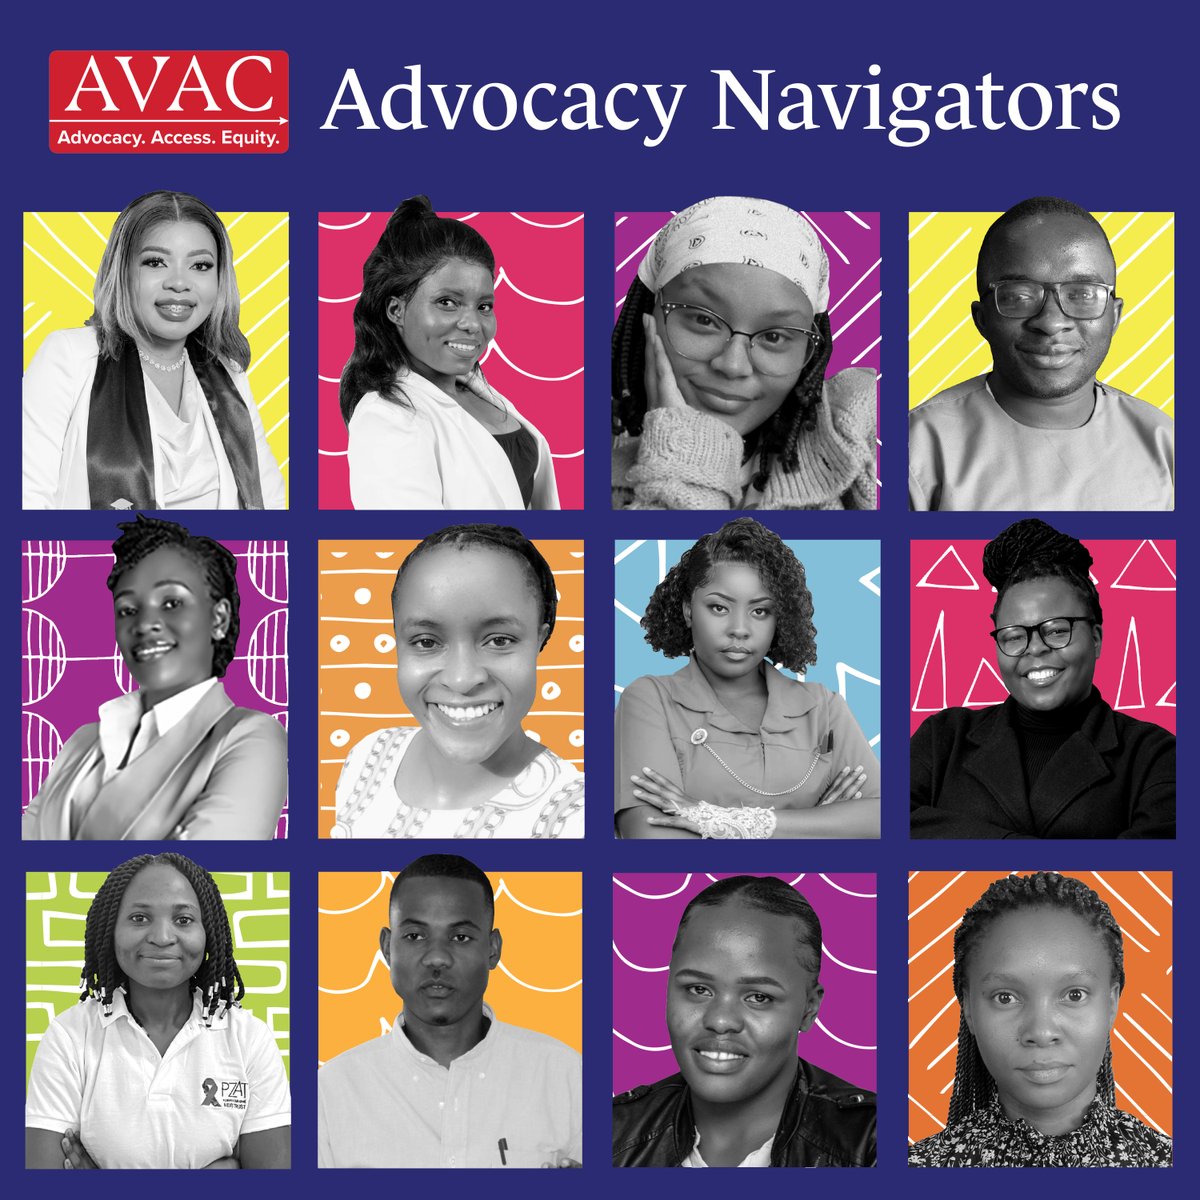 JUST IN! ✨ We are thrilled to announce our 3rd class of Advocacy Navigators! These 12 emerging leaders will be paired with 6 mentors from our Advocacy Fellows programs to take their next steps in #HIV prevention advocacy. Check out the newest Navigators! avac.org/blog/announcin…